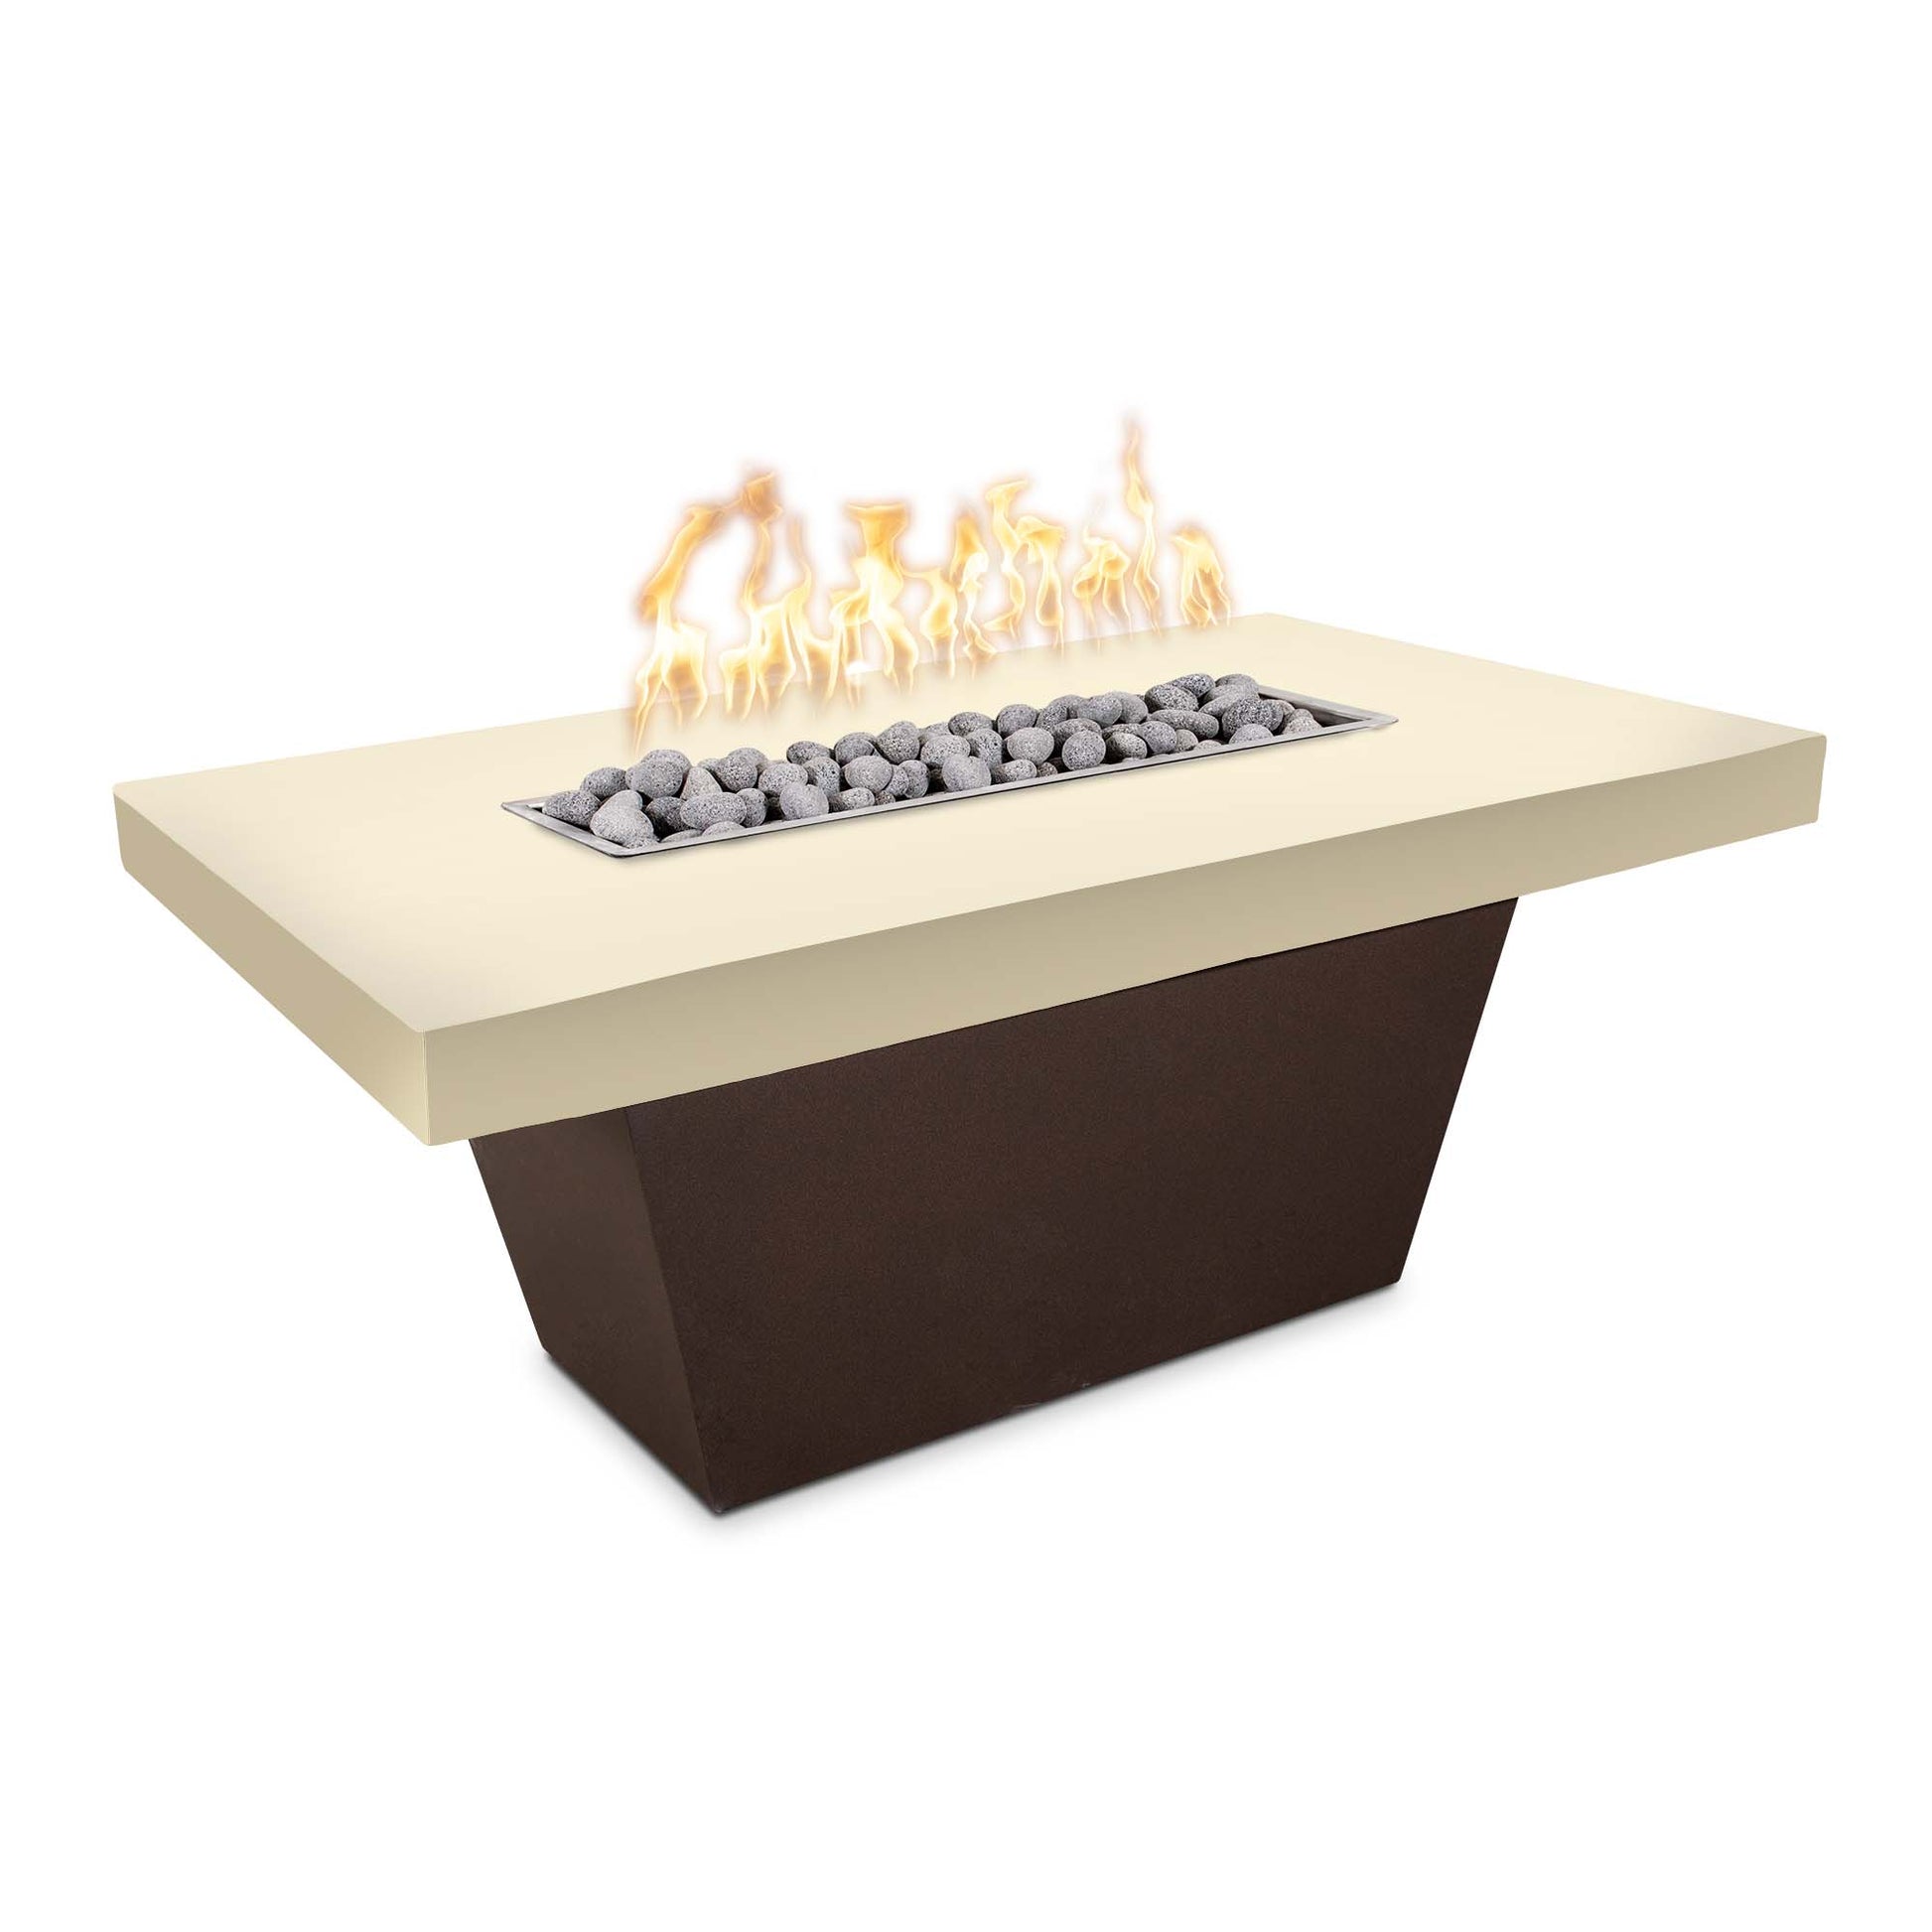 The Outdoor Plus Tacoma 48" Gray Concrete Top & White Powder Coated Base Natural Gas Fire Table with Match Lit Ignition